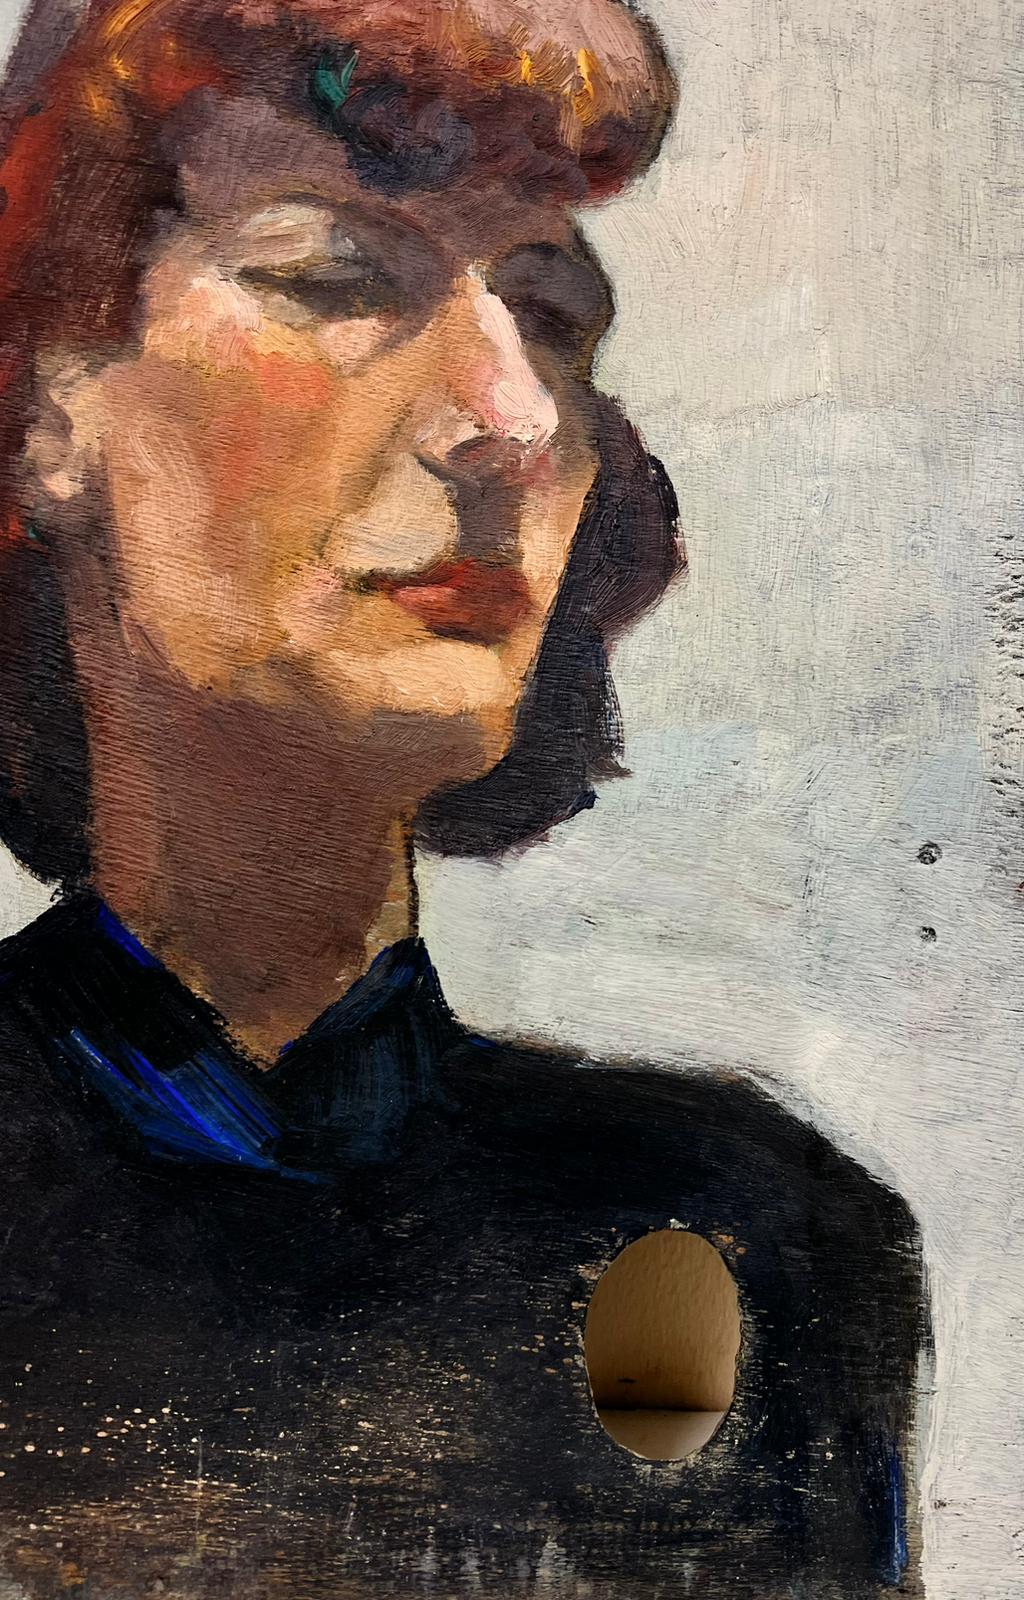 Lady Portrait
by Josine Vignon (French 1922-2022)
signed on front
double sided
oil painting on artists palette, unframed

board: 16 x 13 inches

Colors: Beige colors, brown, blue, grey and orange

Very good condition

Provenance: from the artists